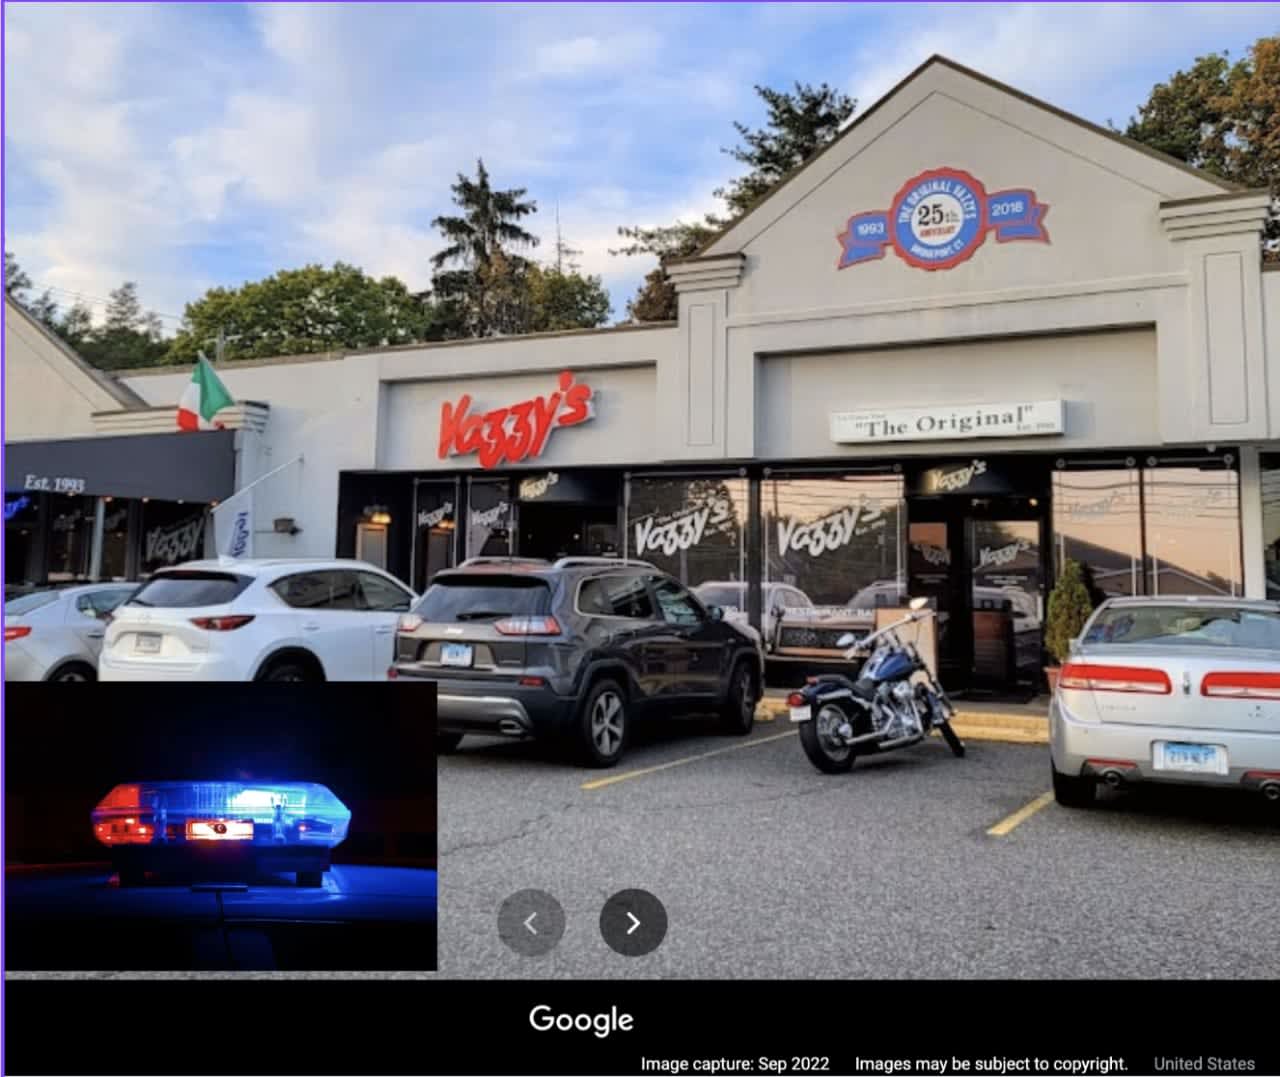 Two armed men forced an employee at gunpoint to open the restaurant so they could rob it.